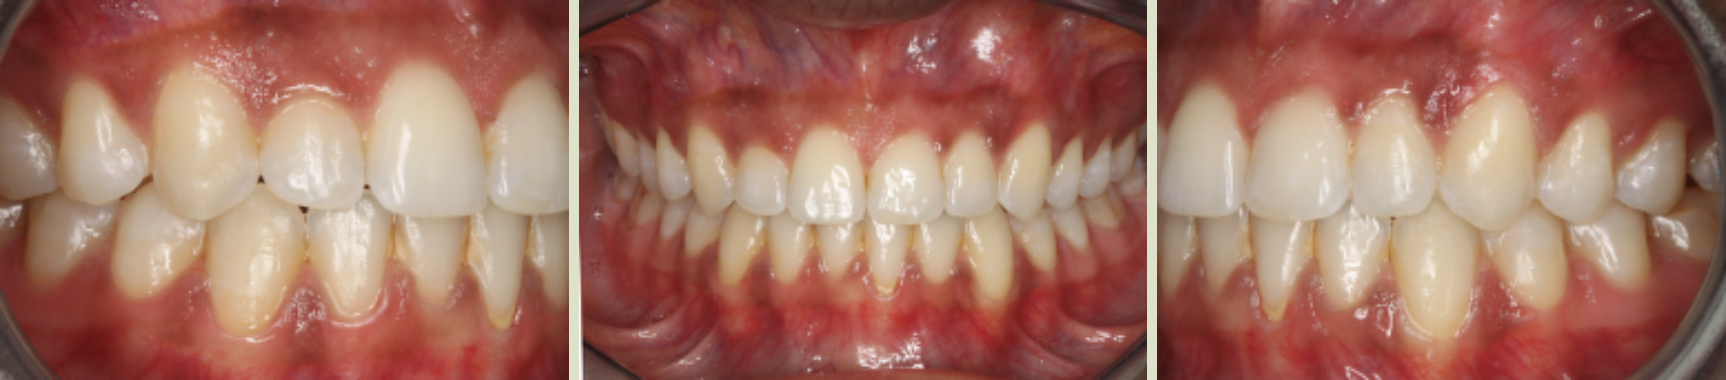 Invisalign Case Study 6: After clear aligner treatment with retainer, view of front teeth